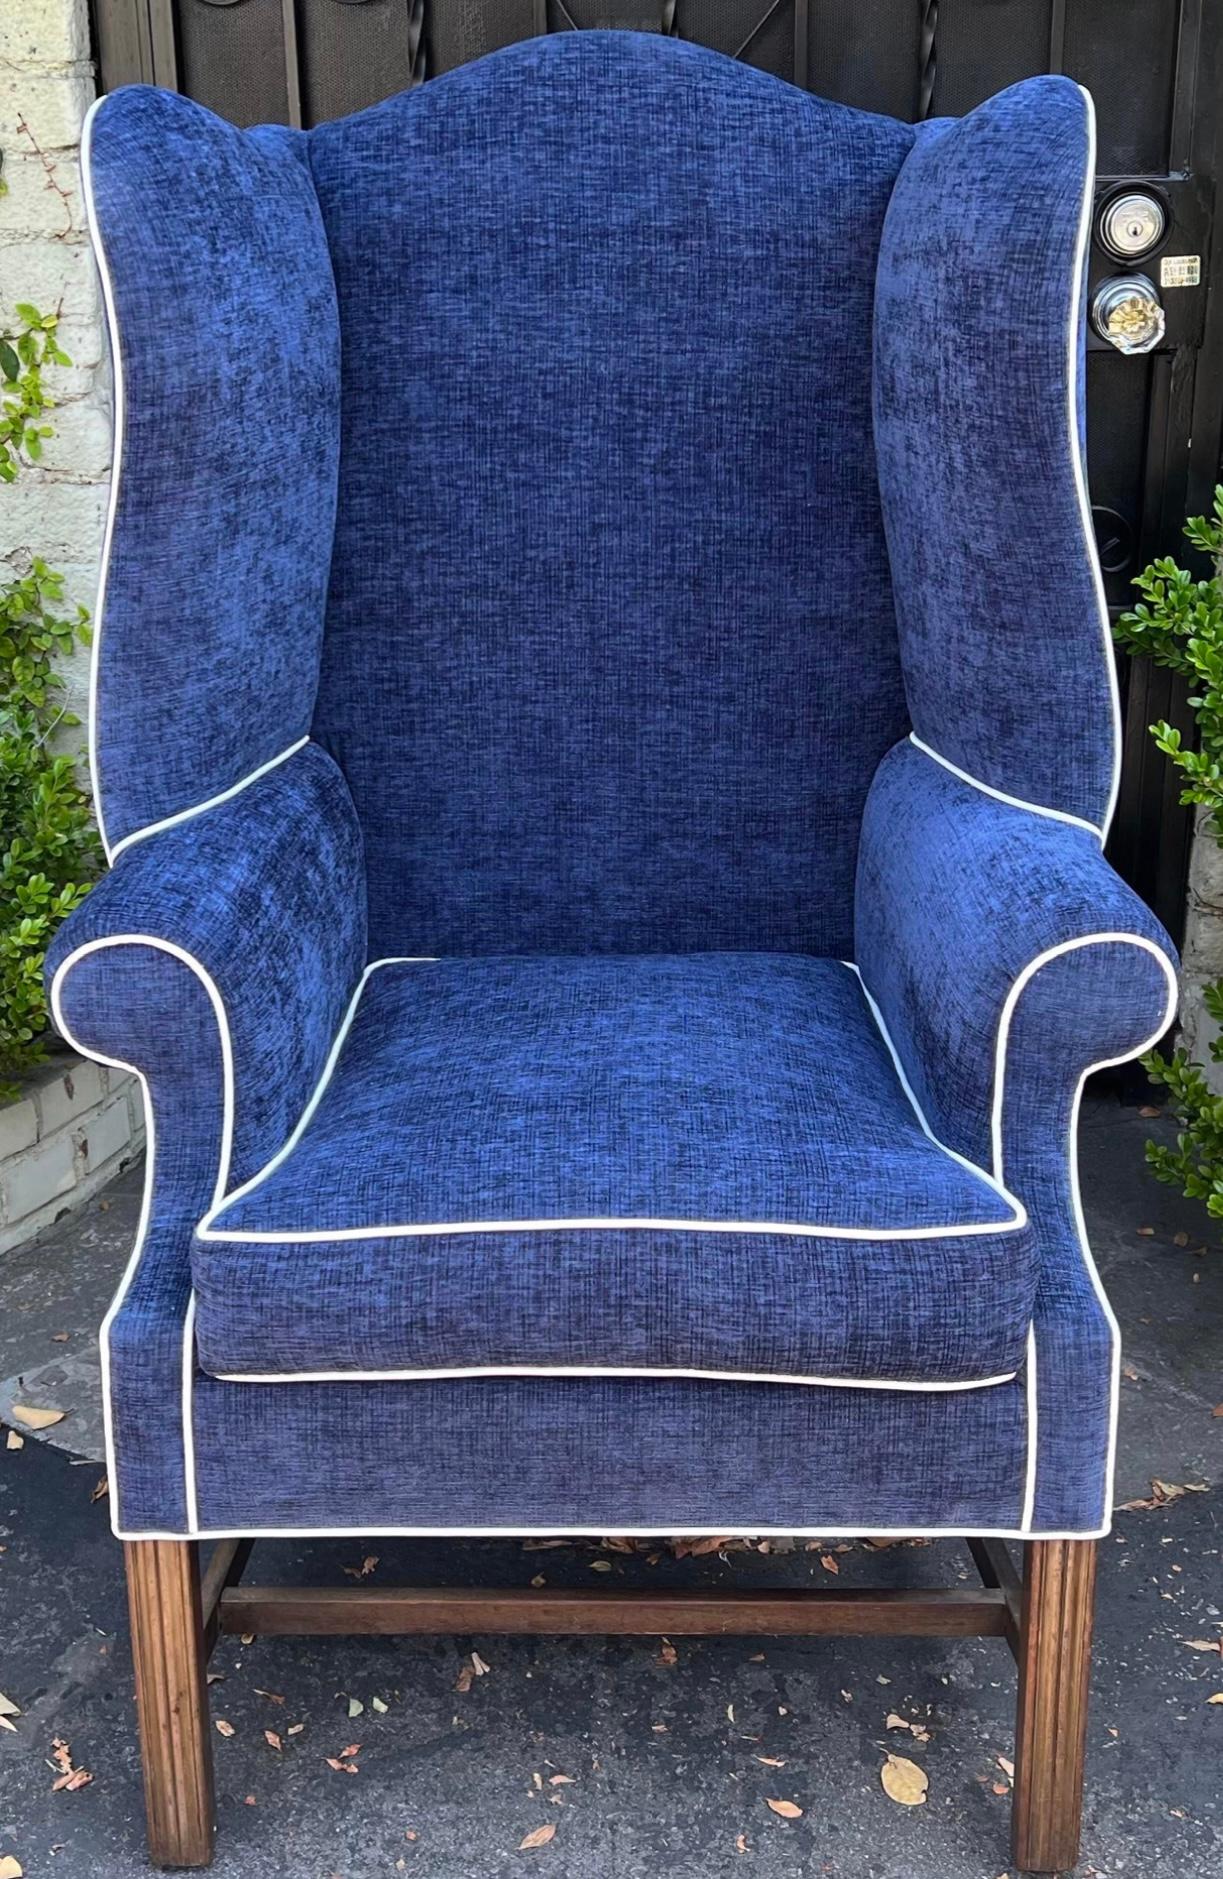 Antique Early 19c George III Petite Wingback Chair. It has been freshly upholstered in an unexpected denim velvet with white piping.